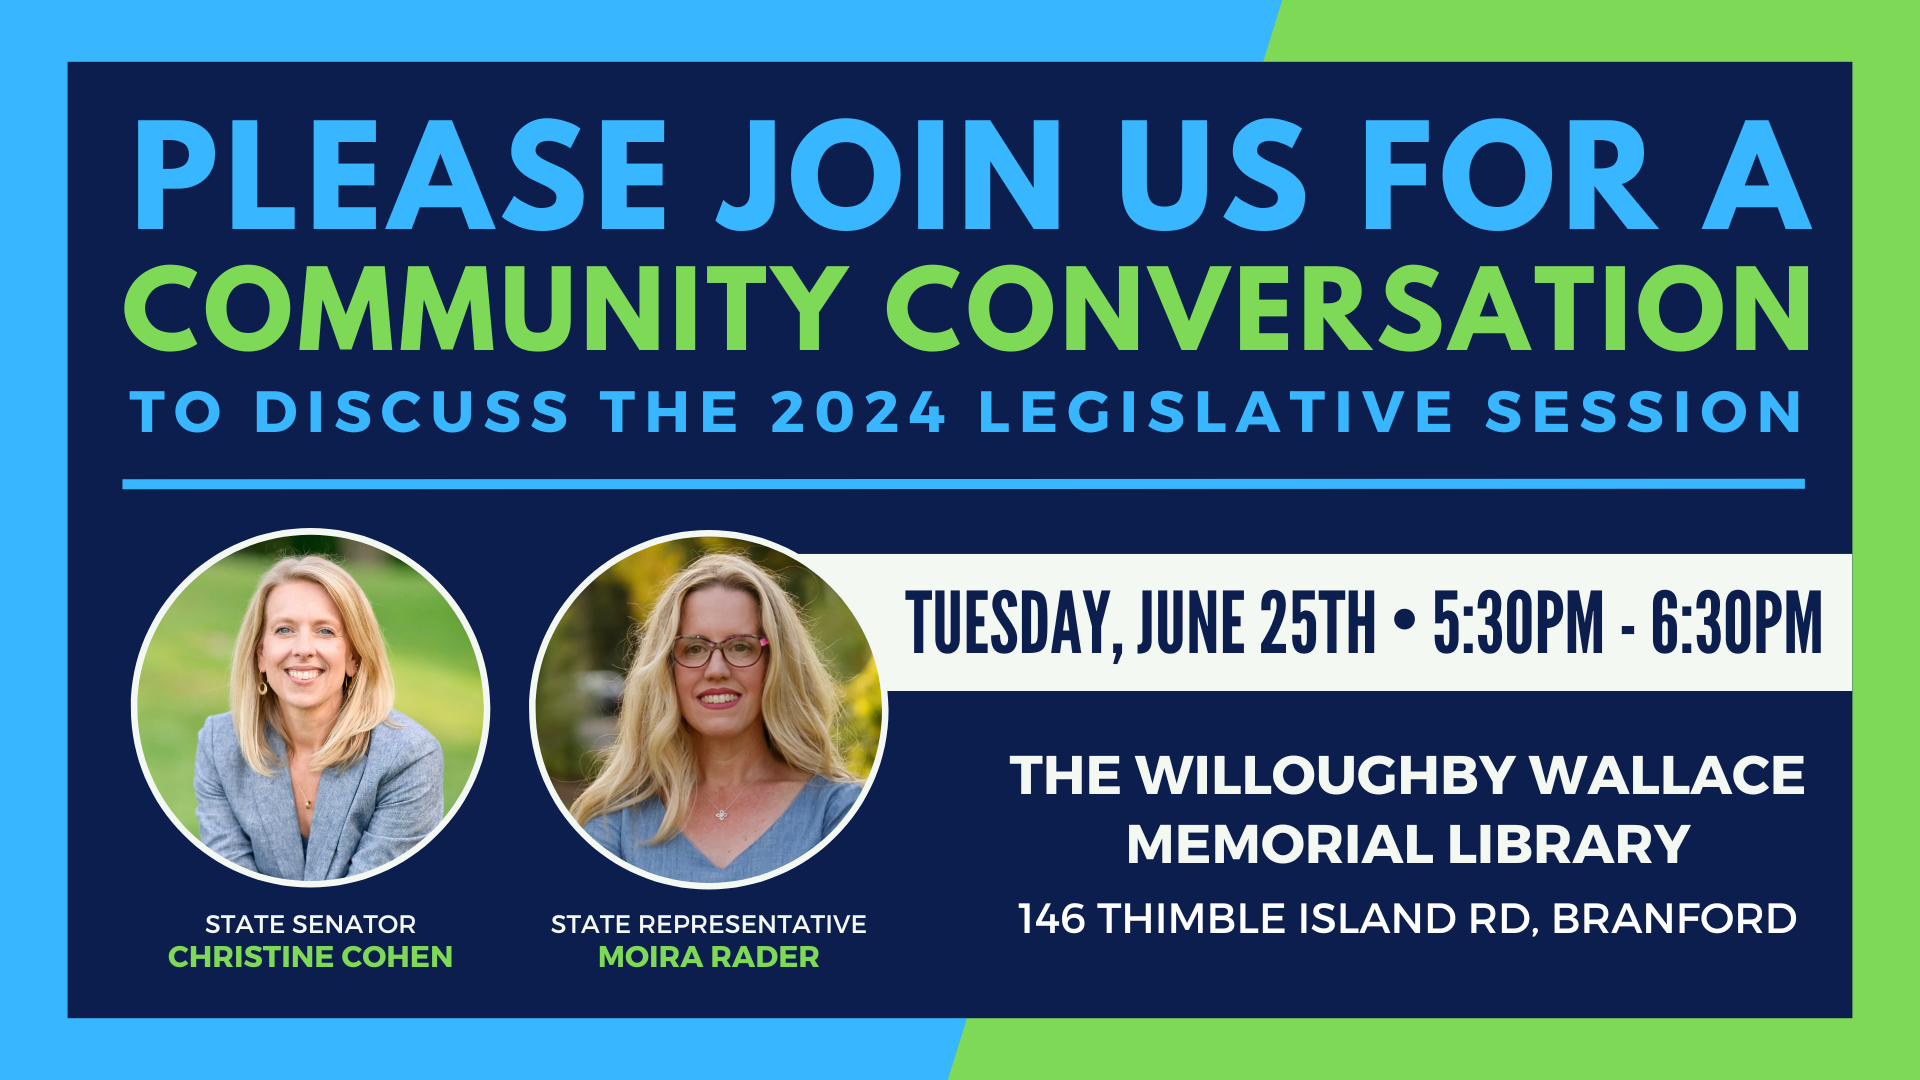 Please join Senator Cohen and me on June 25 at 5:30 p.m. at the Willoughby Wallace Memorial Library in Stony Creek - Branford. We'd love for you to come and share your thoughts on the 2024 legislative session, offer ideas you would like us to consider, and hear about important legislation passed this year. 